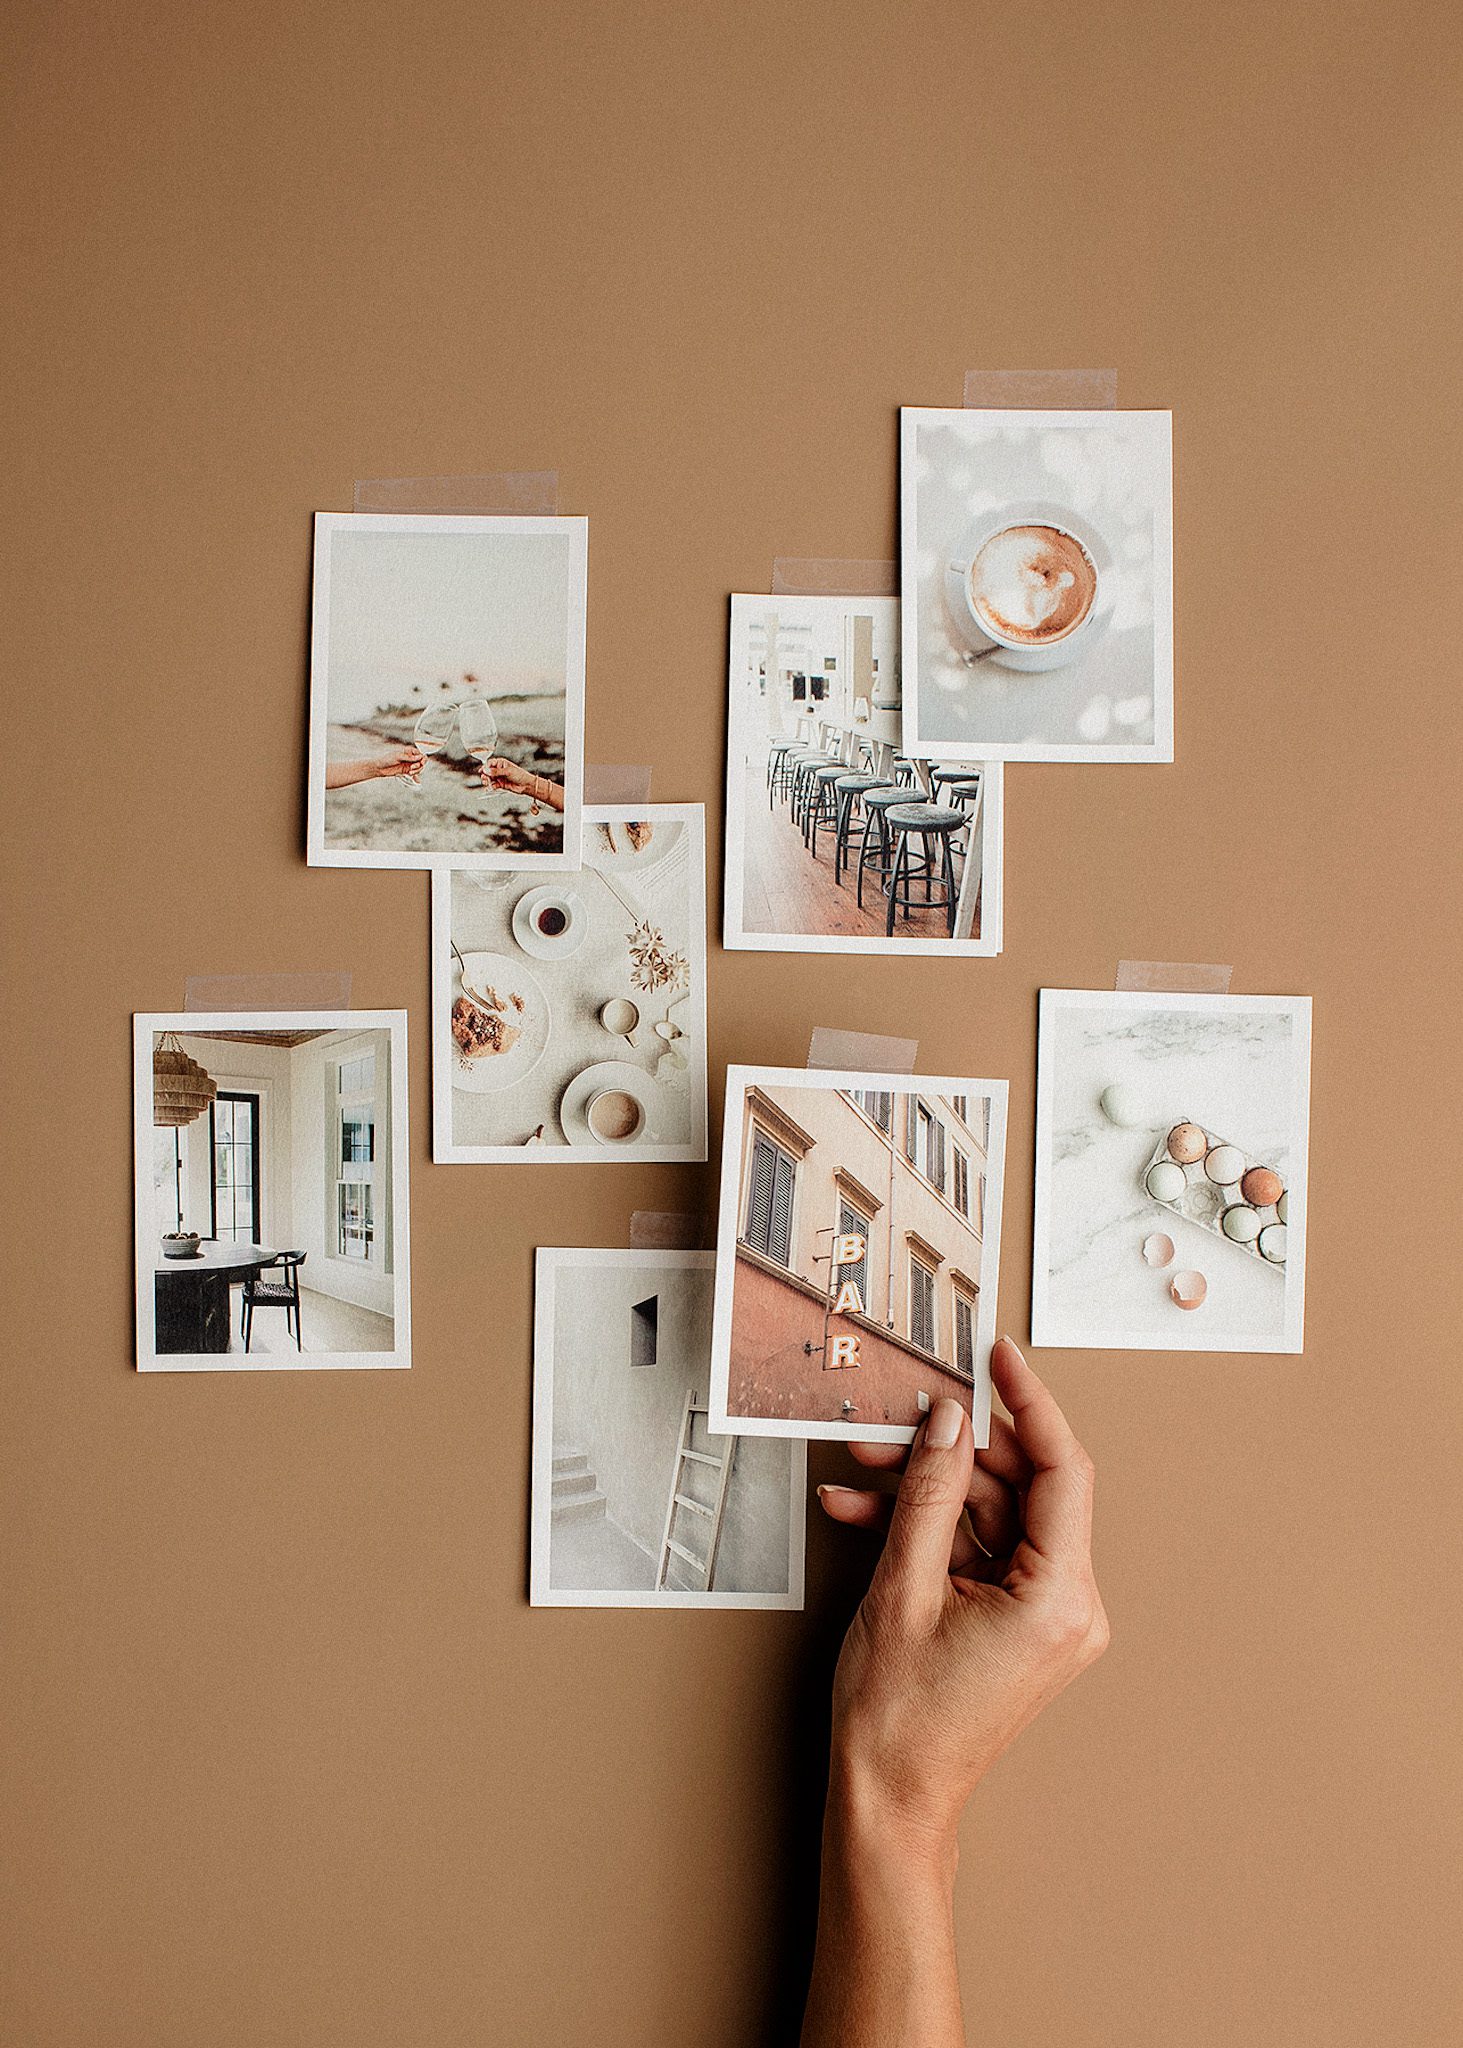 hand sorting through printed photographs on tan surface